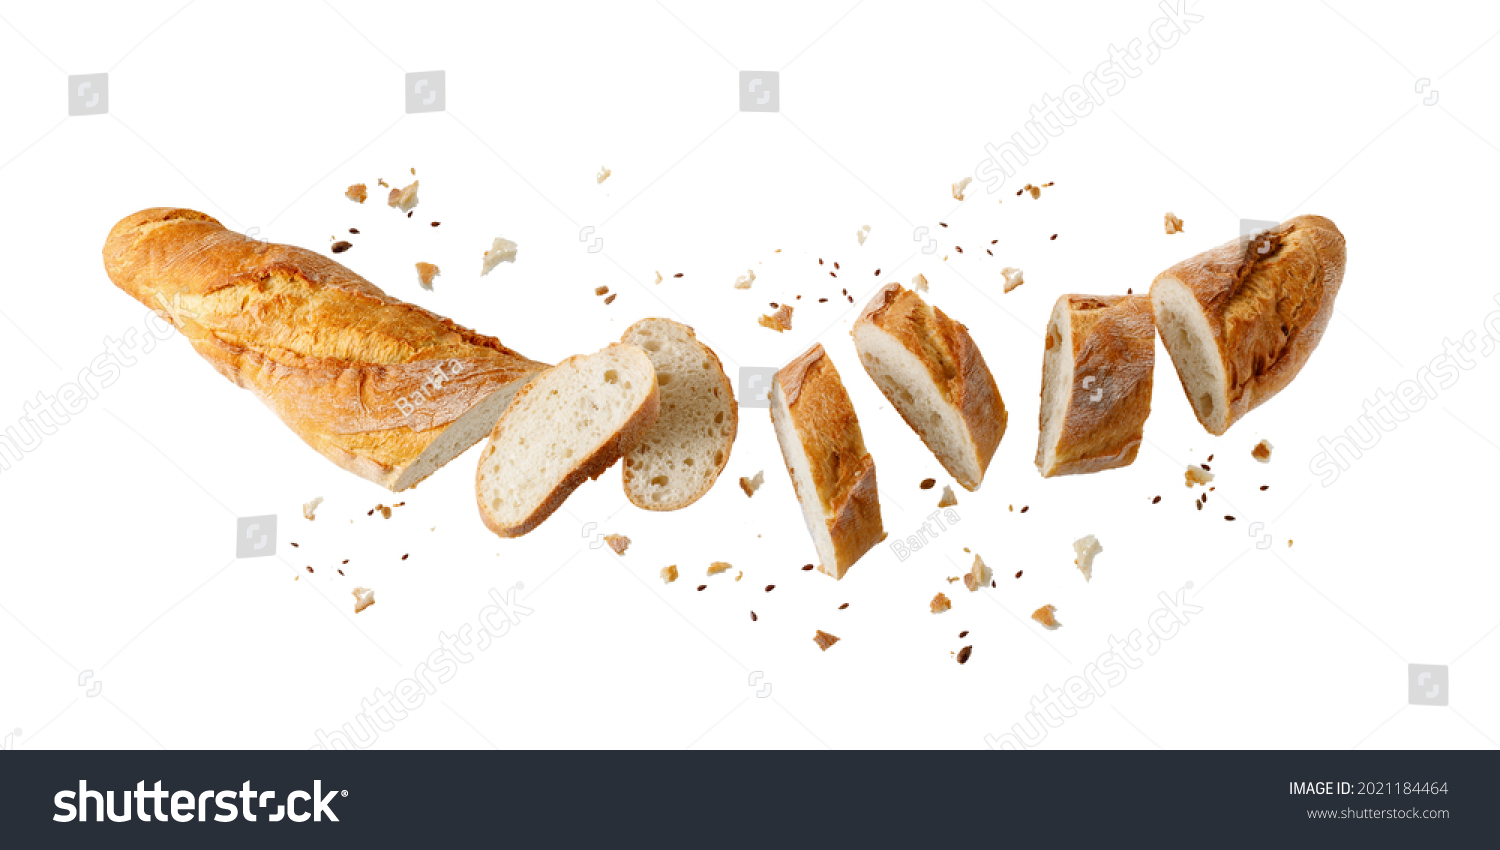 Cutting fresh baked loaf wheat baguette bread  with crumbs and seeds flying isolated on white background.  #2021184464